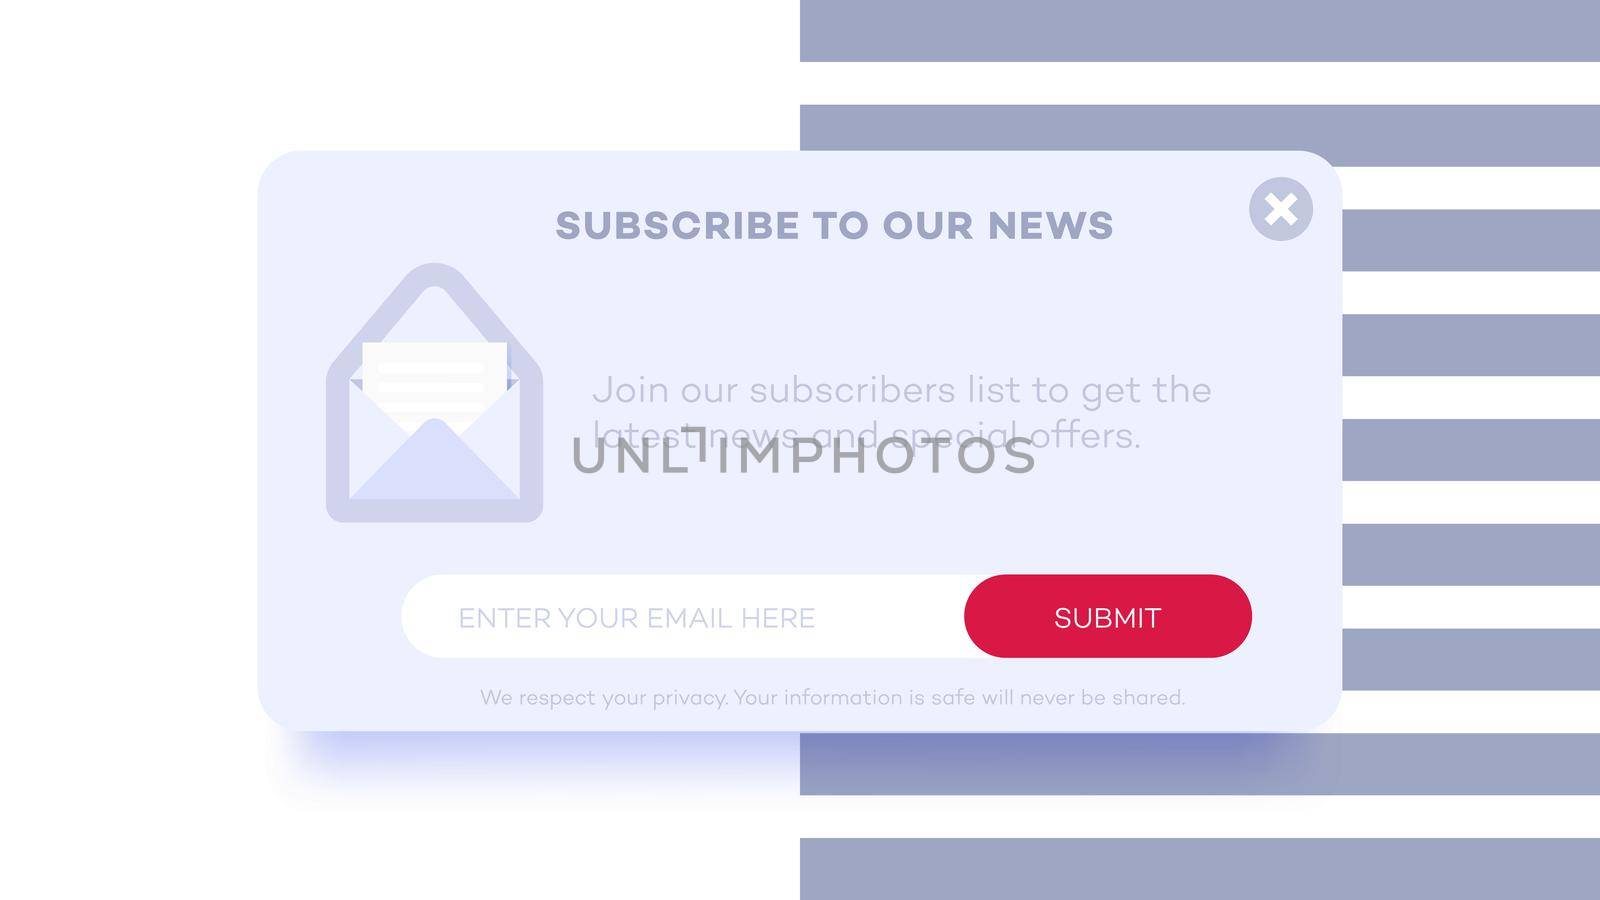 Email subscribe to latest news. Website element with e-mail subscribition Popup form. Web template for subscribition page design. Clean and simple vector illustration.